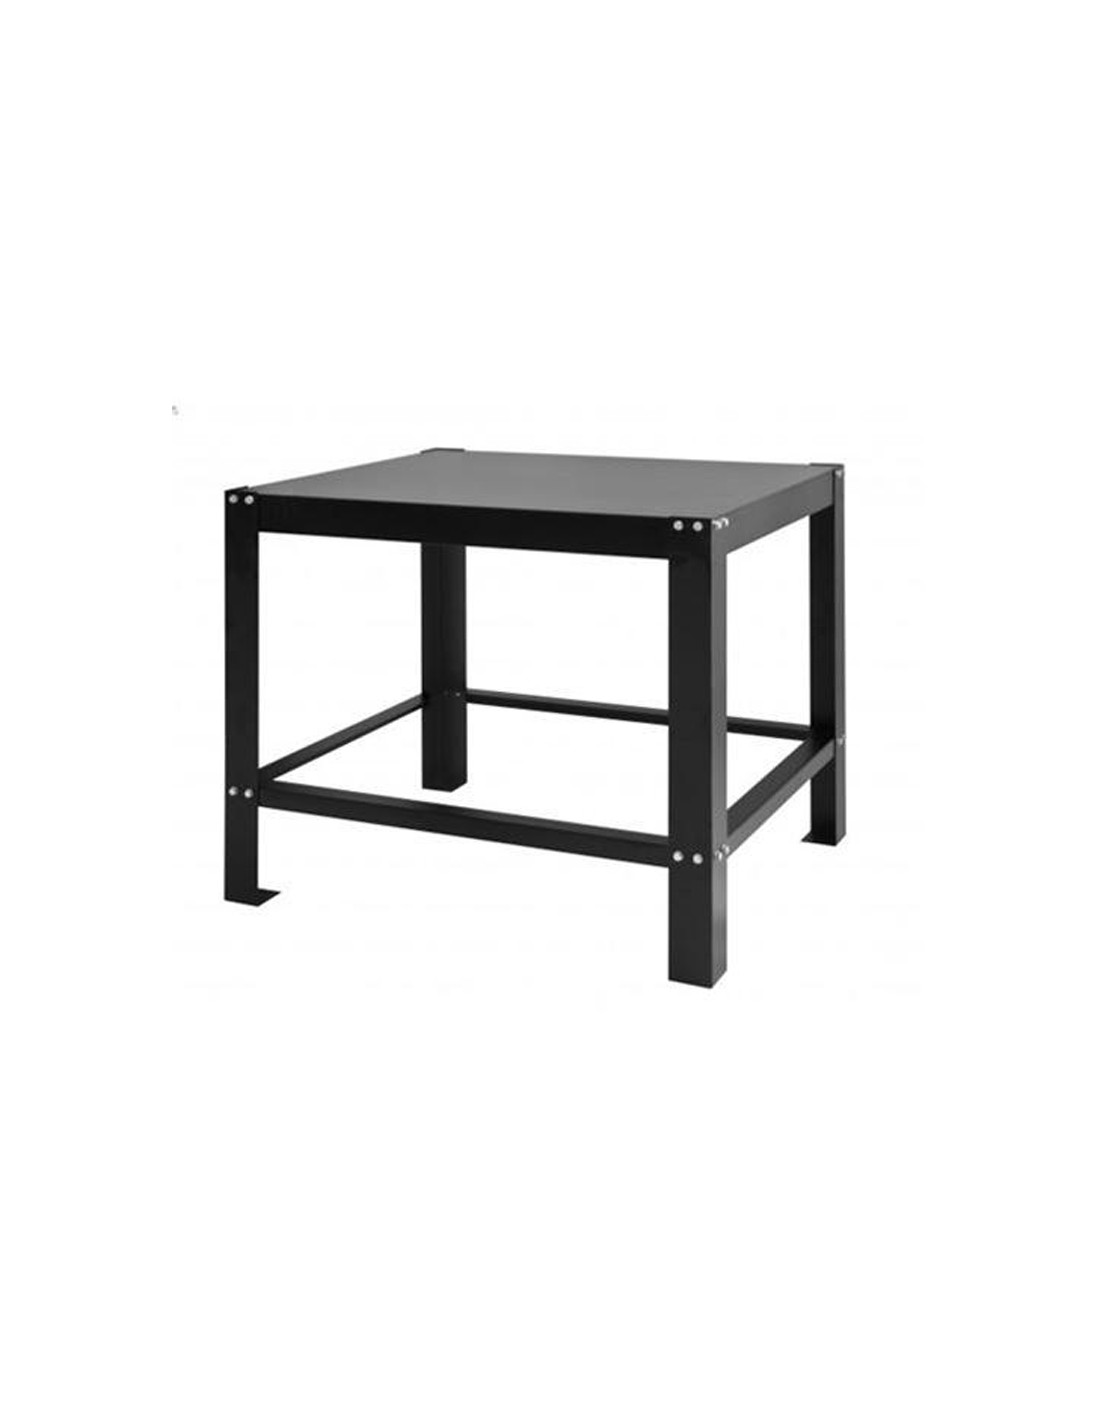 Black painted iron support - Ideal for Trays -Dimensions cm 150.4 x 81.9 x 95.7 h